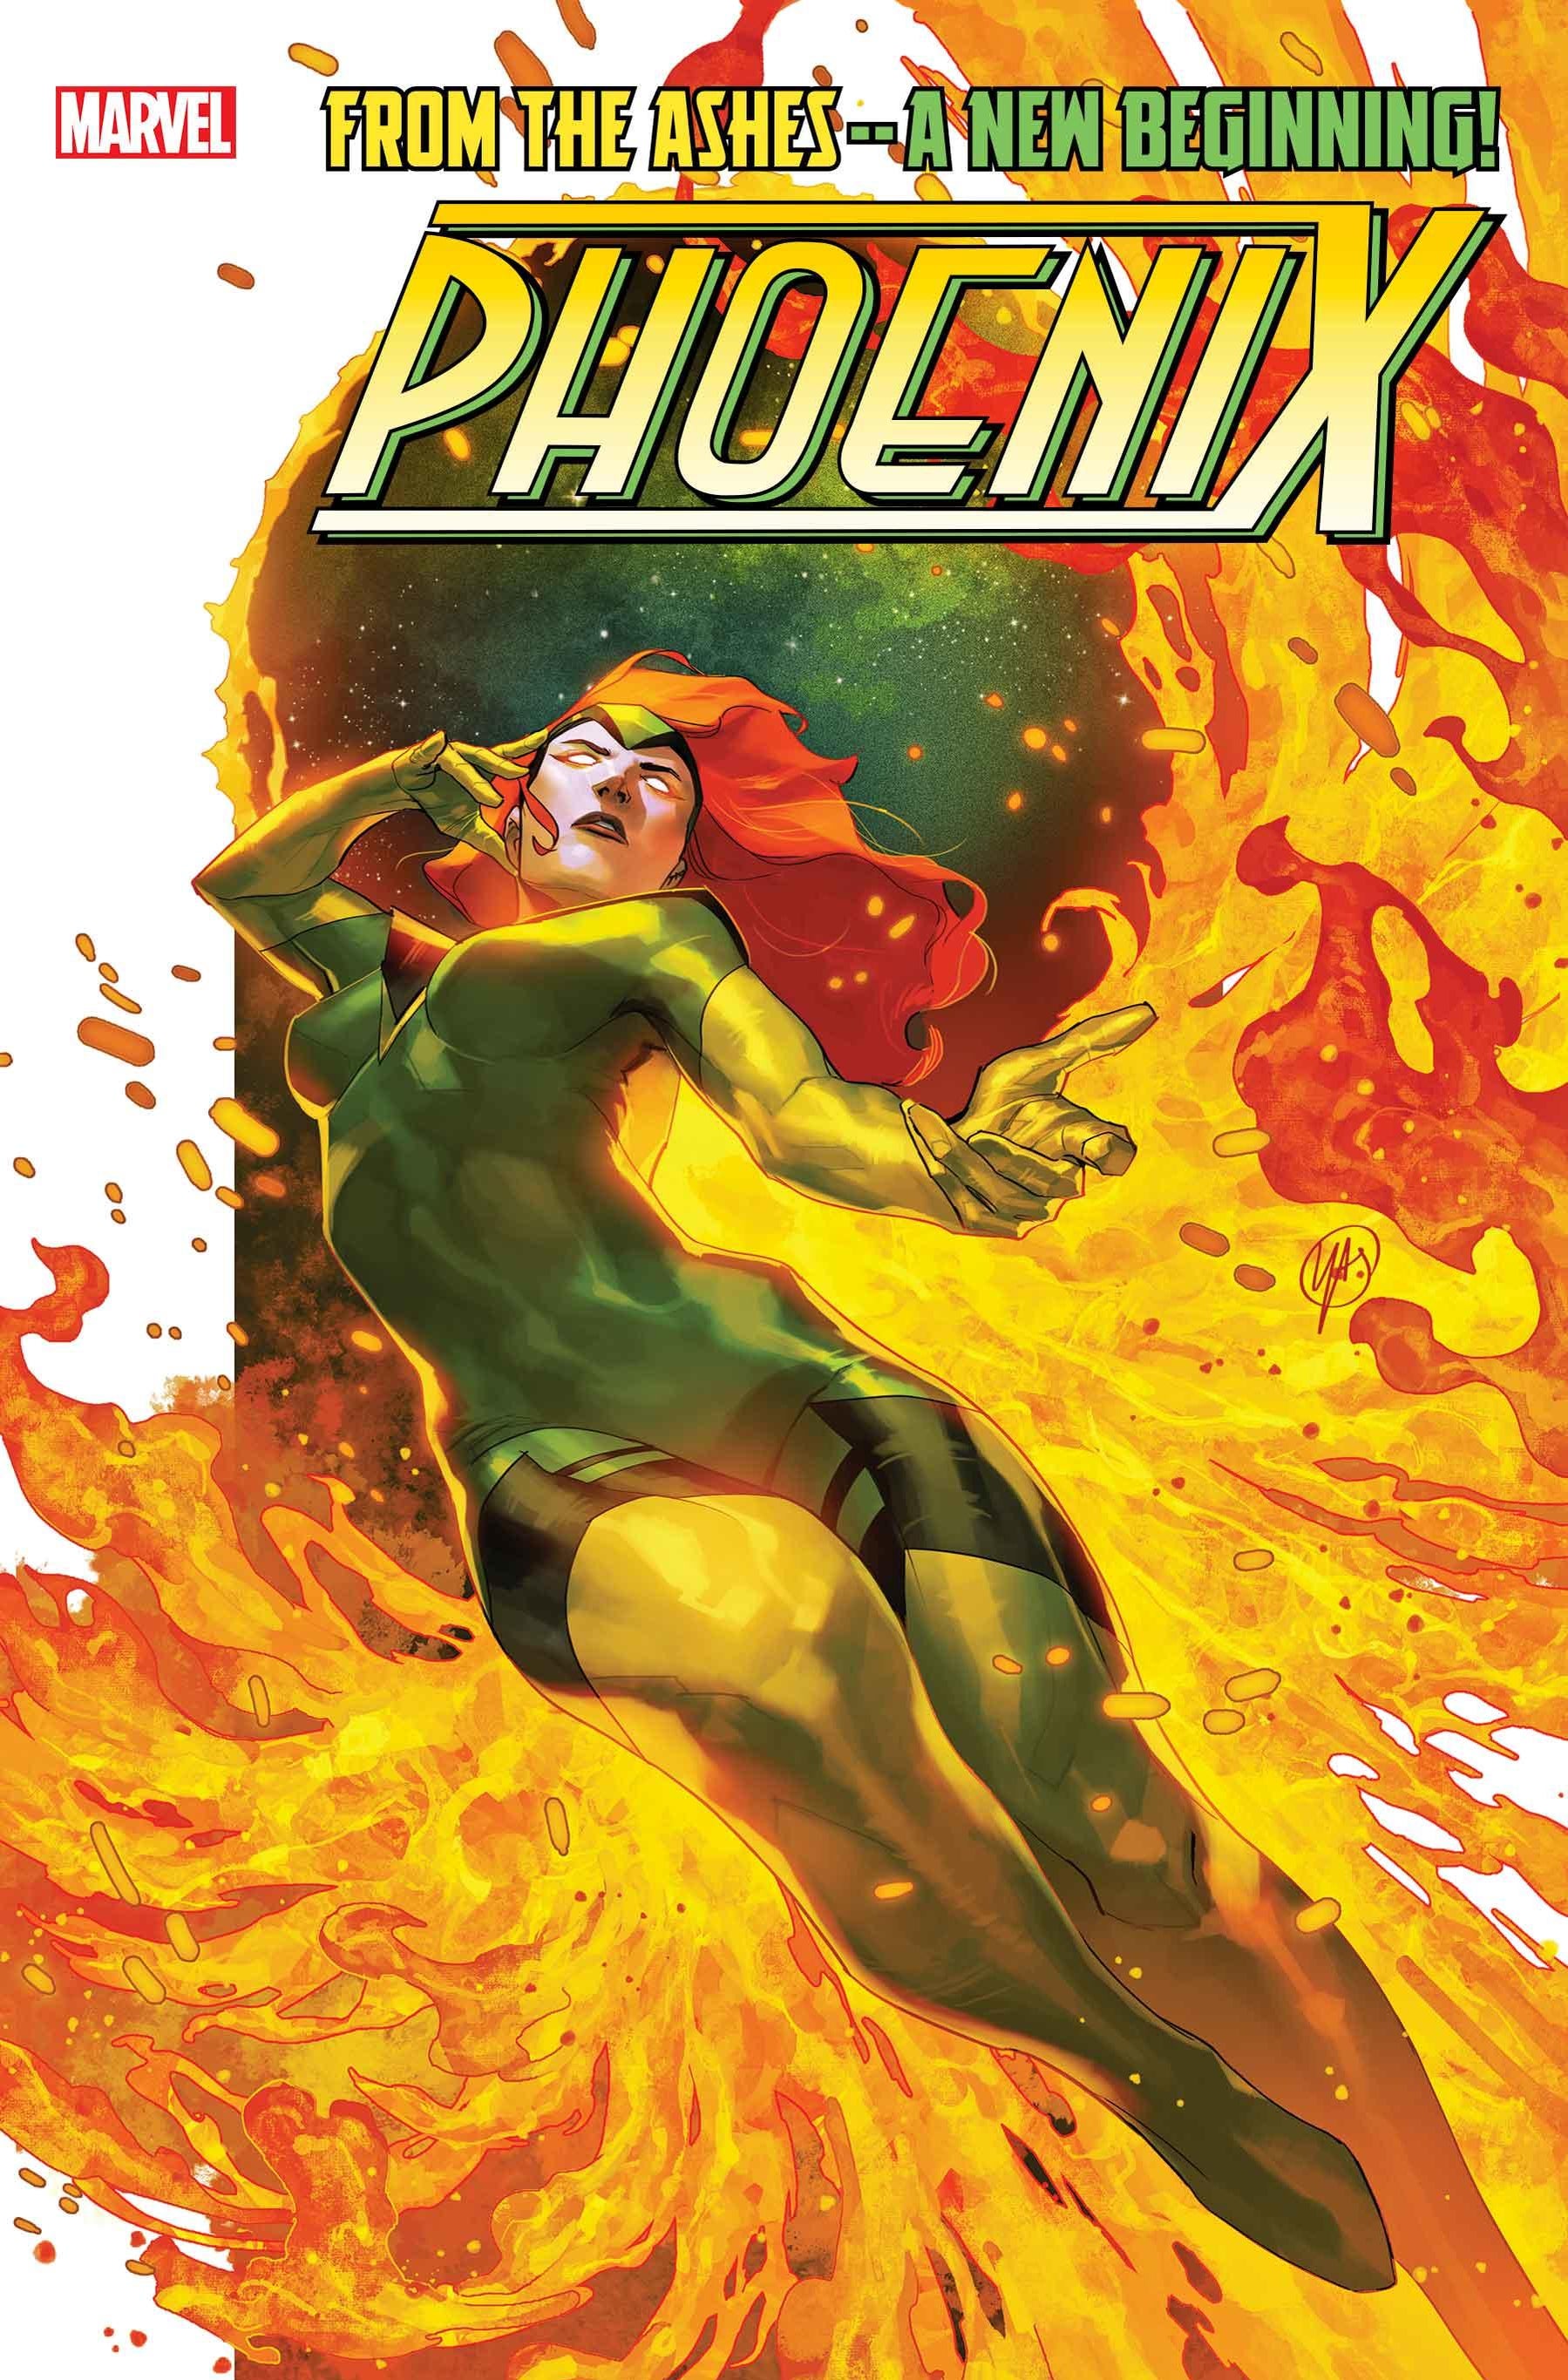 Jean Grey Stars in New Phoenix Series for Marvel's X-Men From the Ashes Relaunch